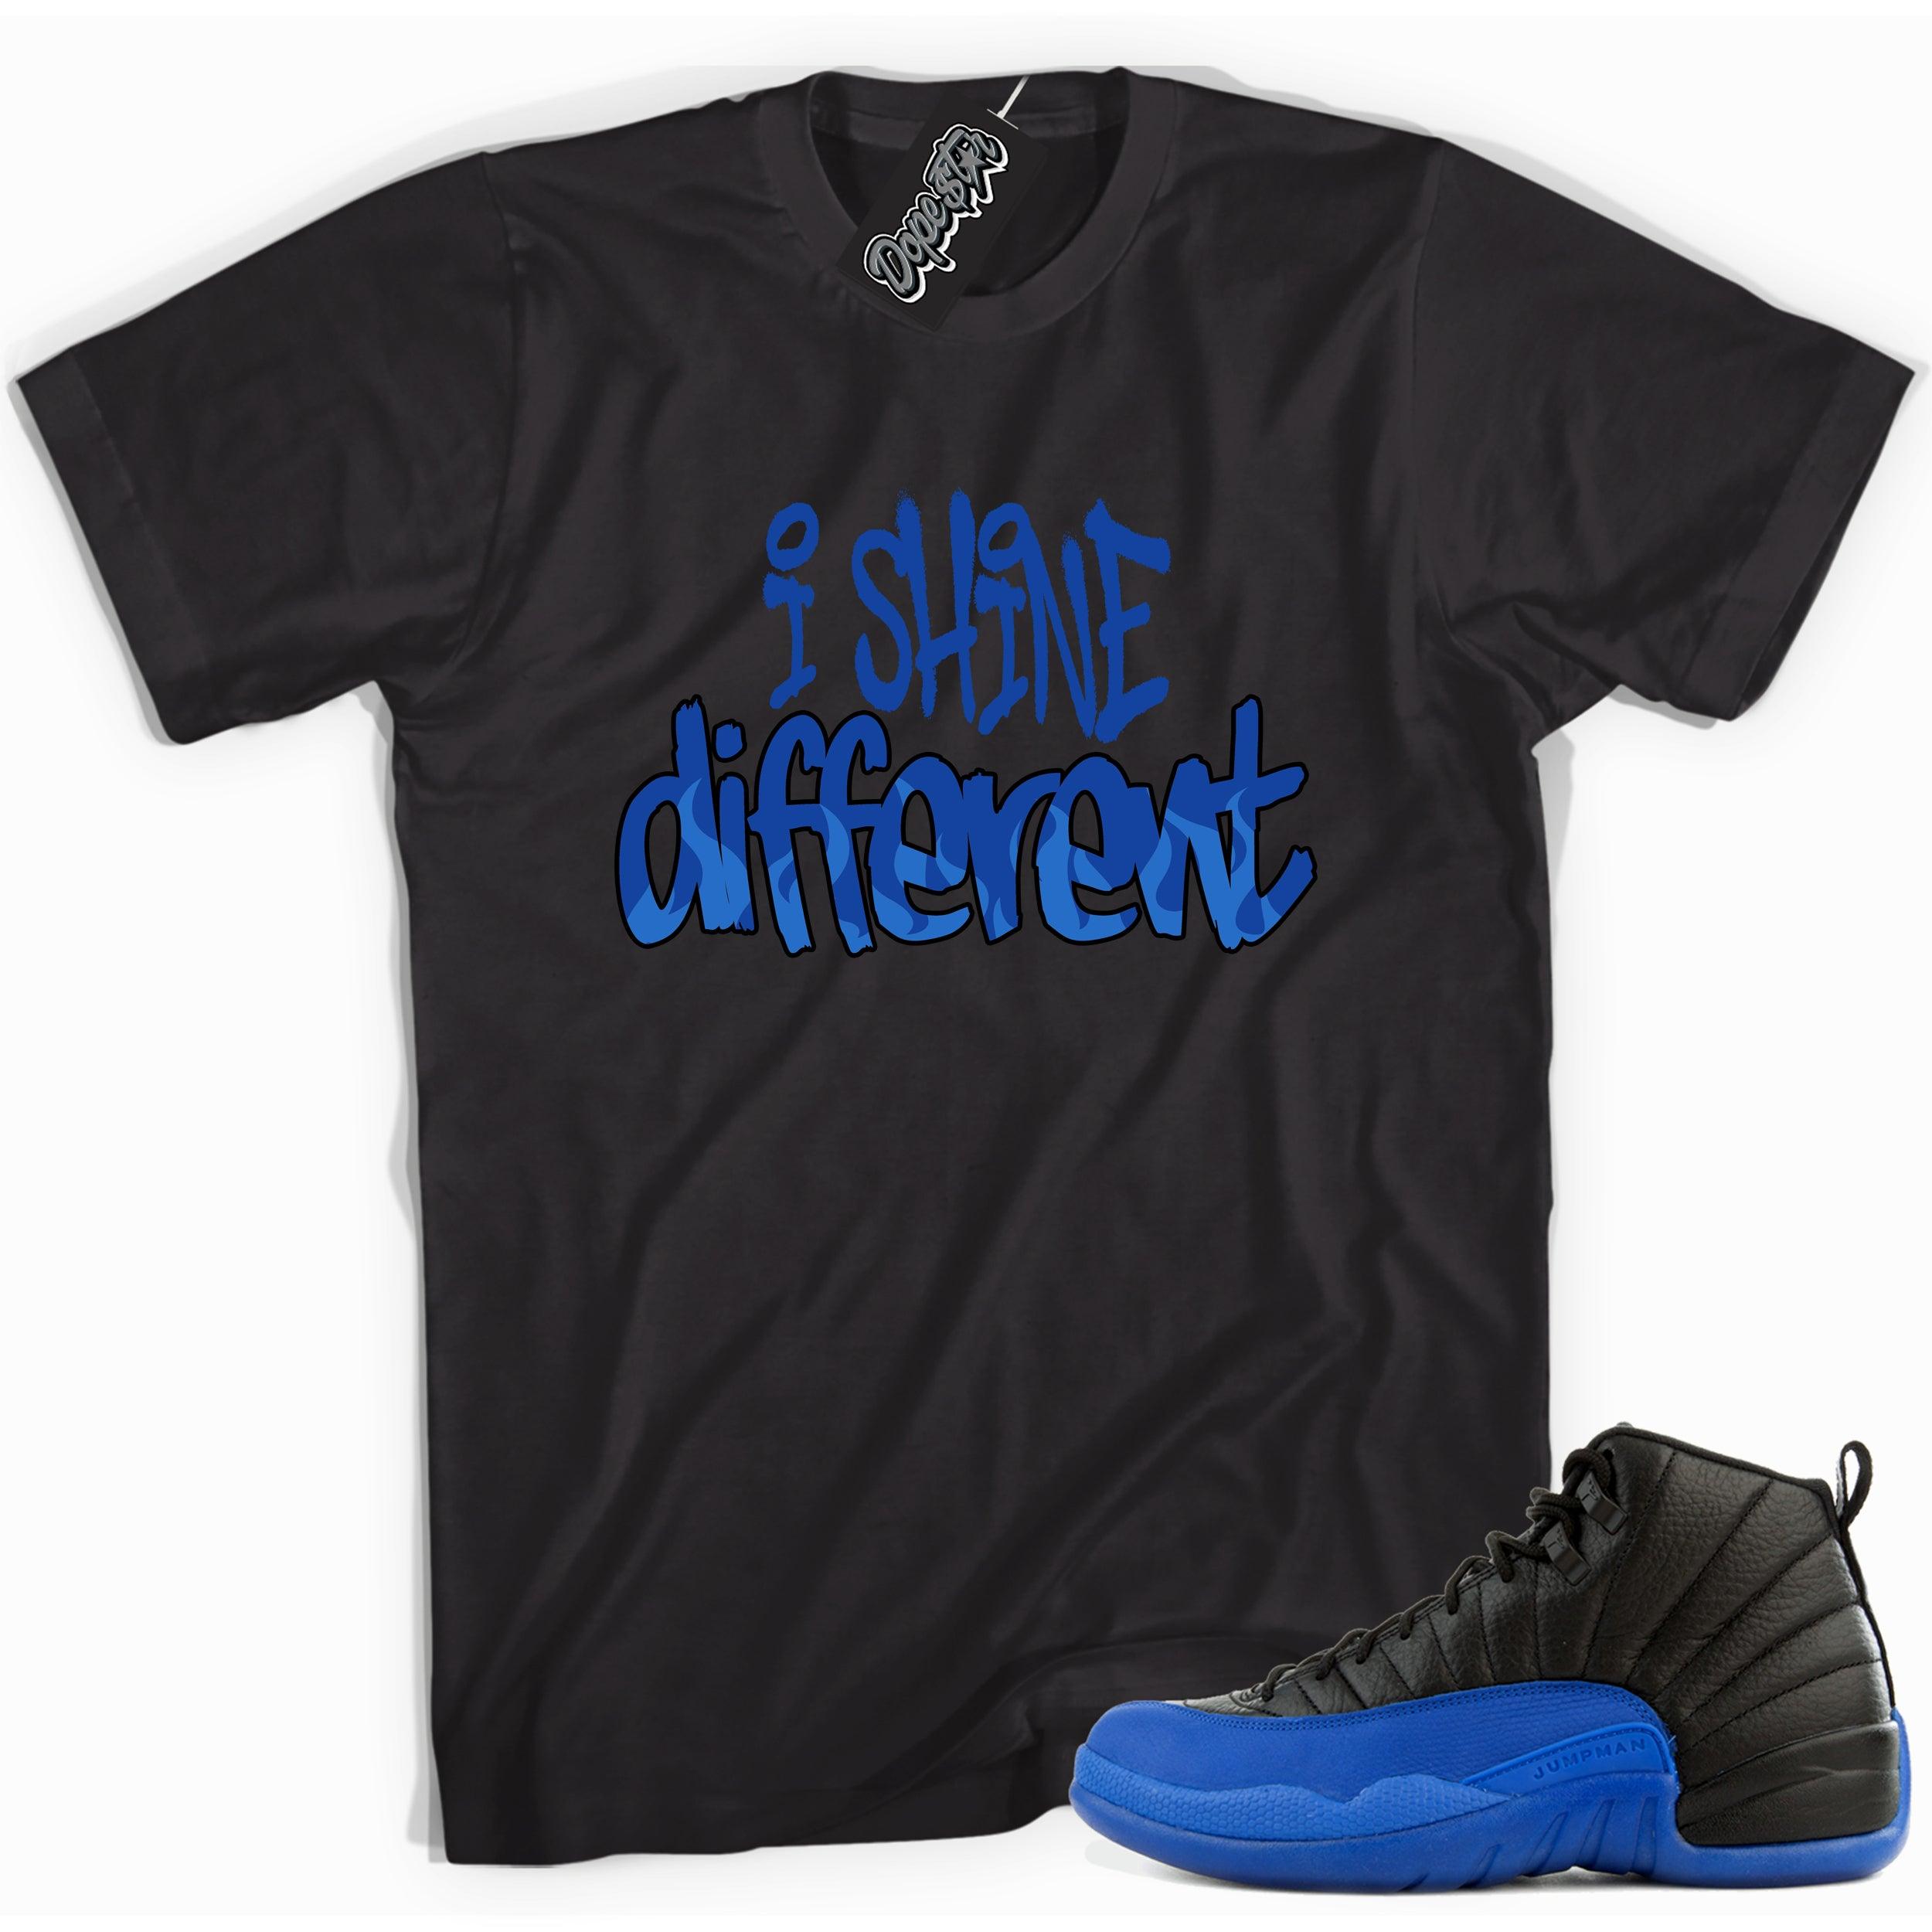 Cool black graphic tee with 'i shine different' print, that perfectly matches  Air Jordan 12 Retro Black Game Royal sneakers.